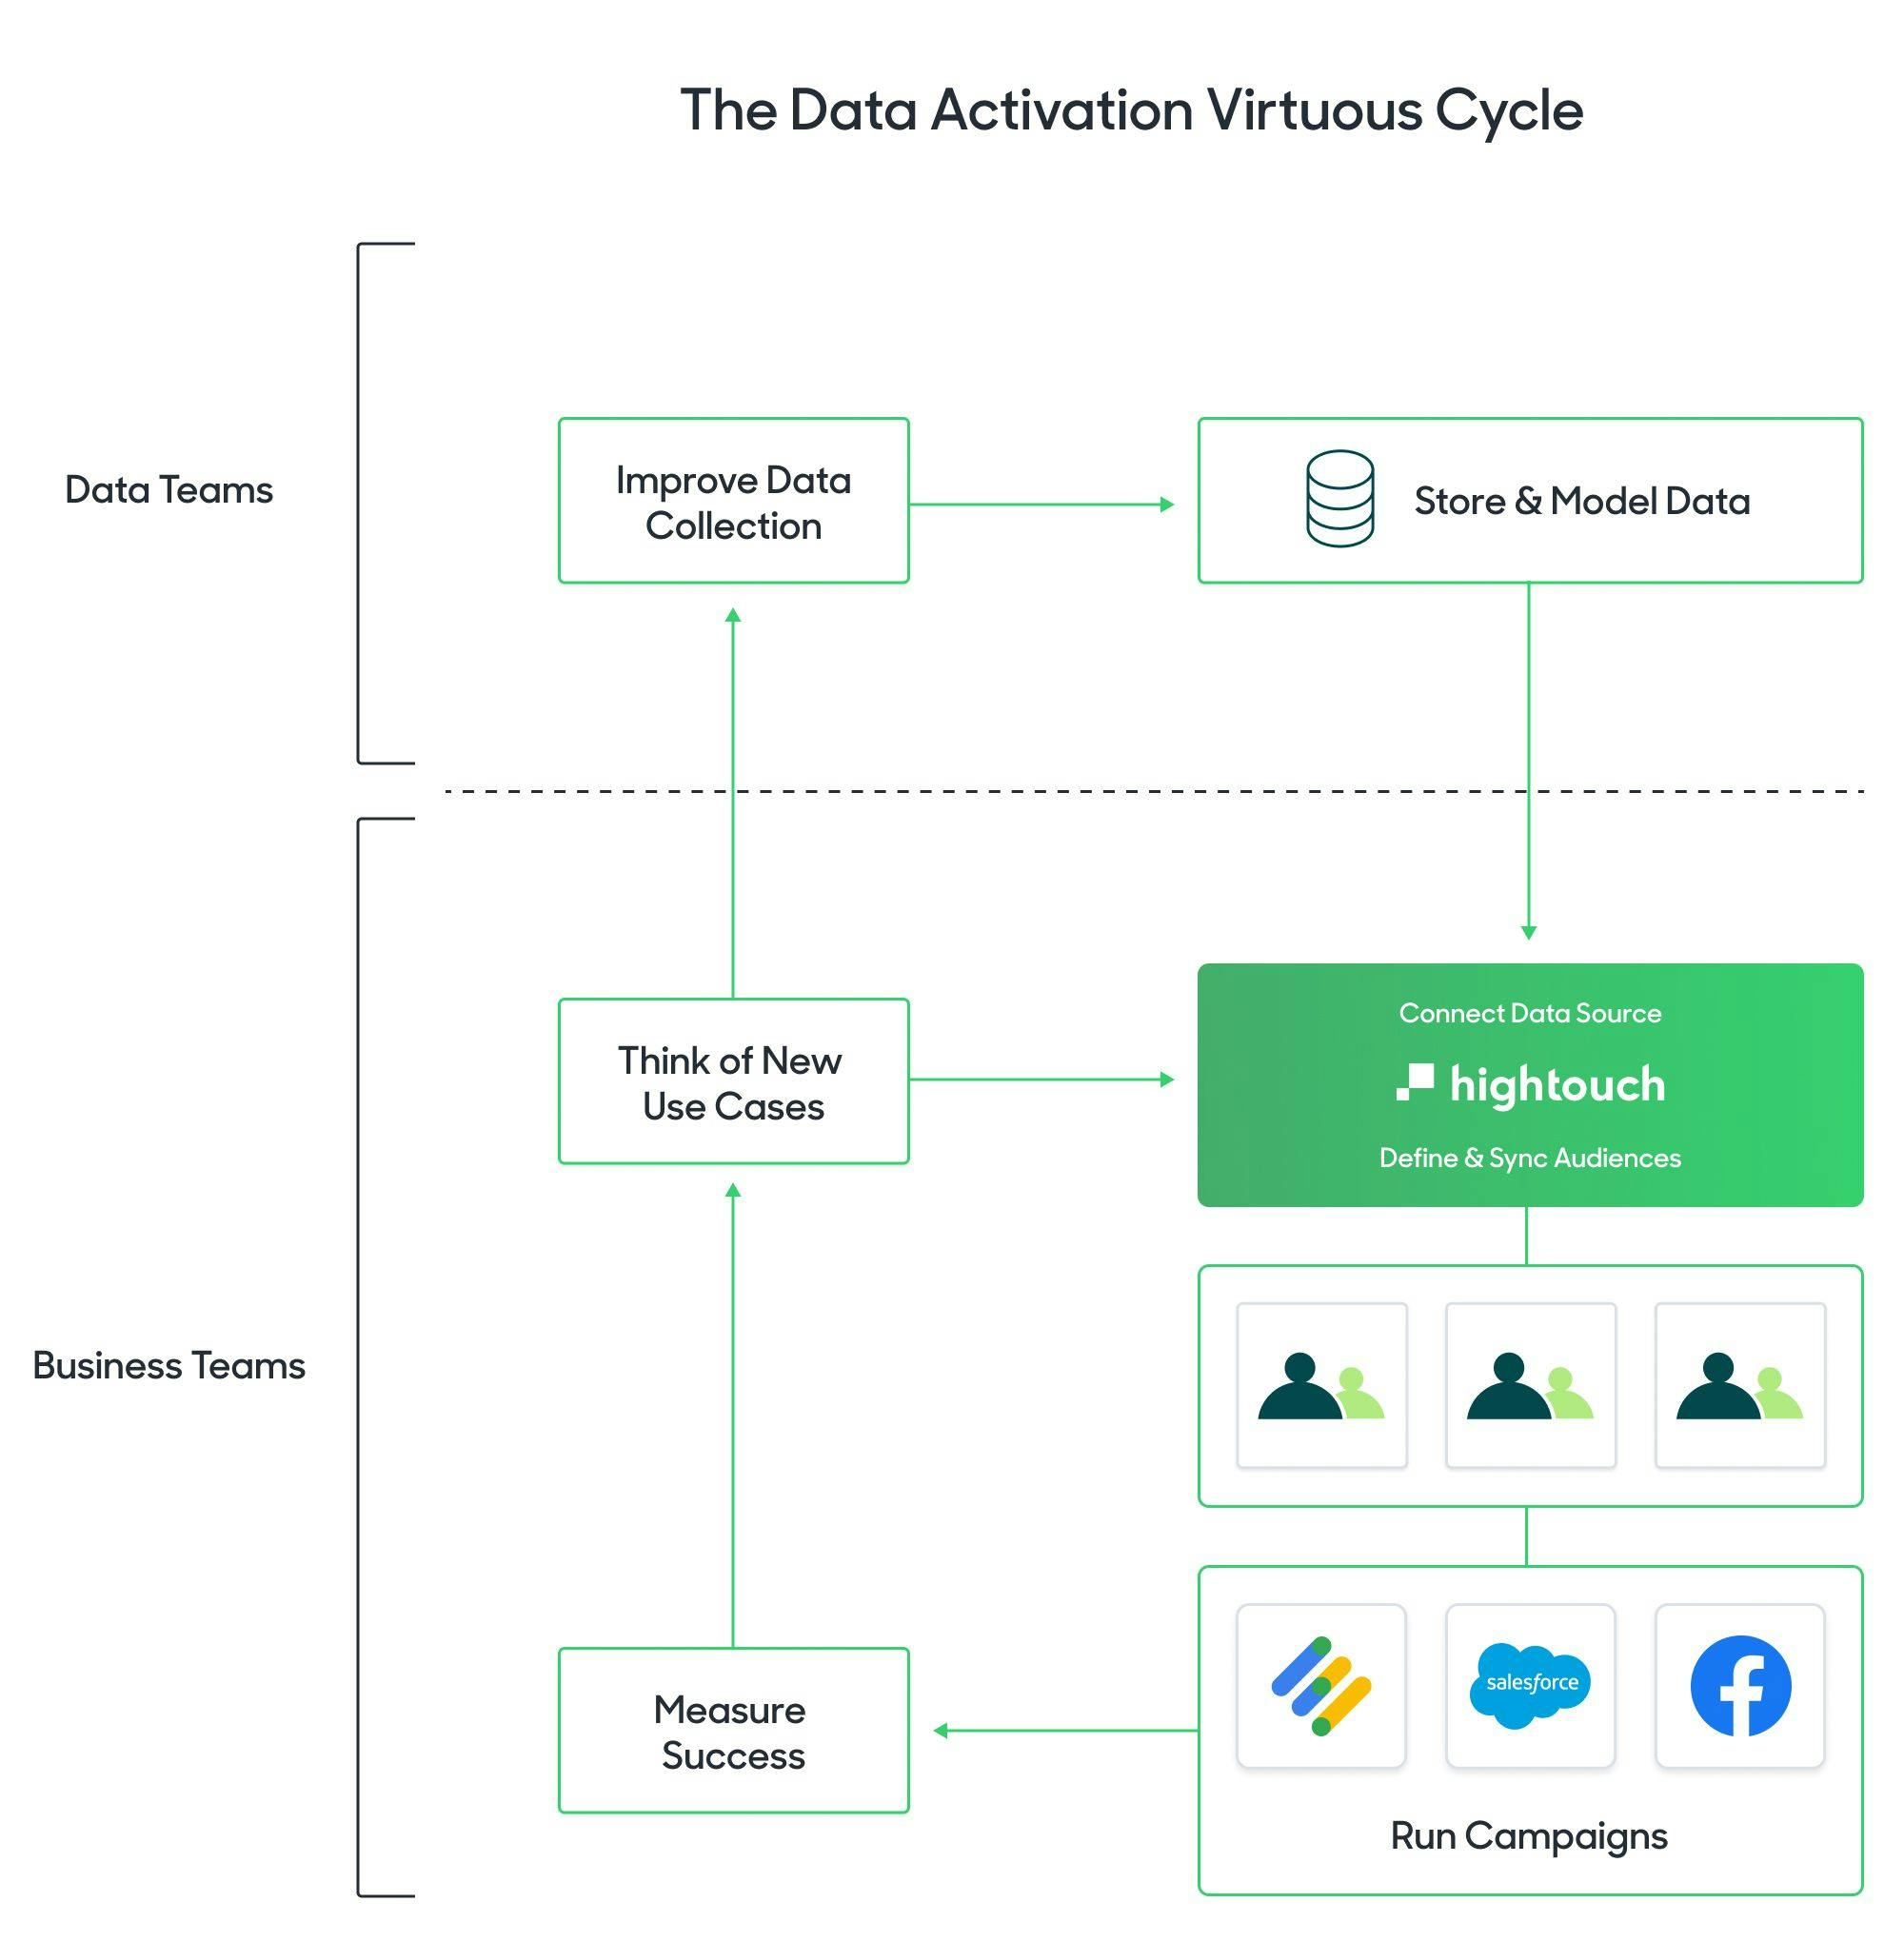 The Data Activation Virtuous Cycle